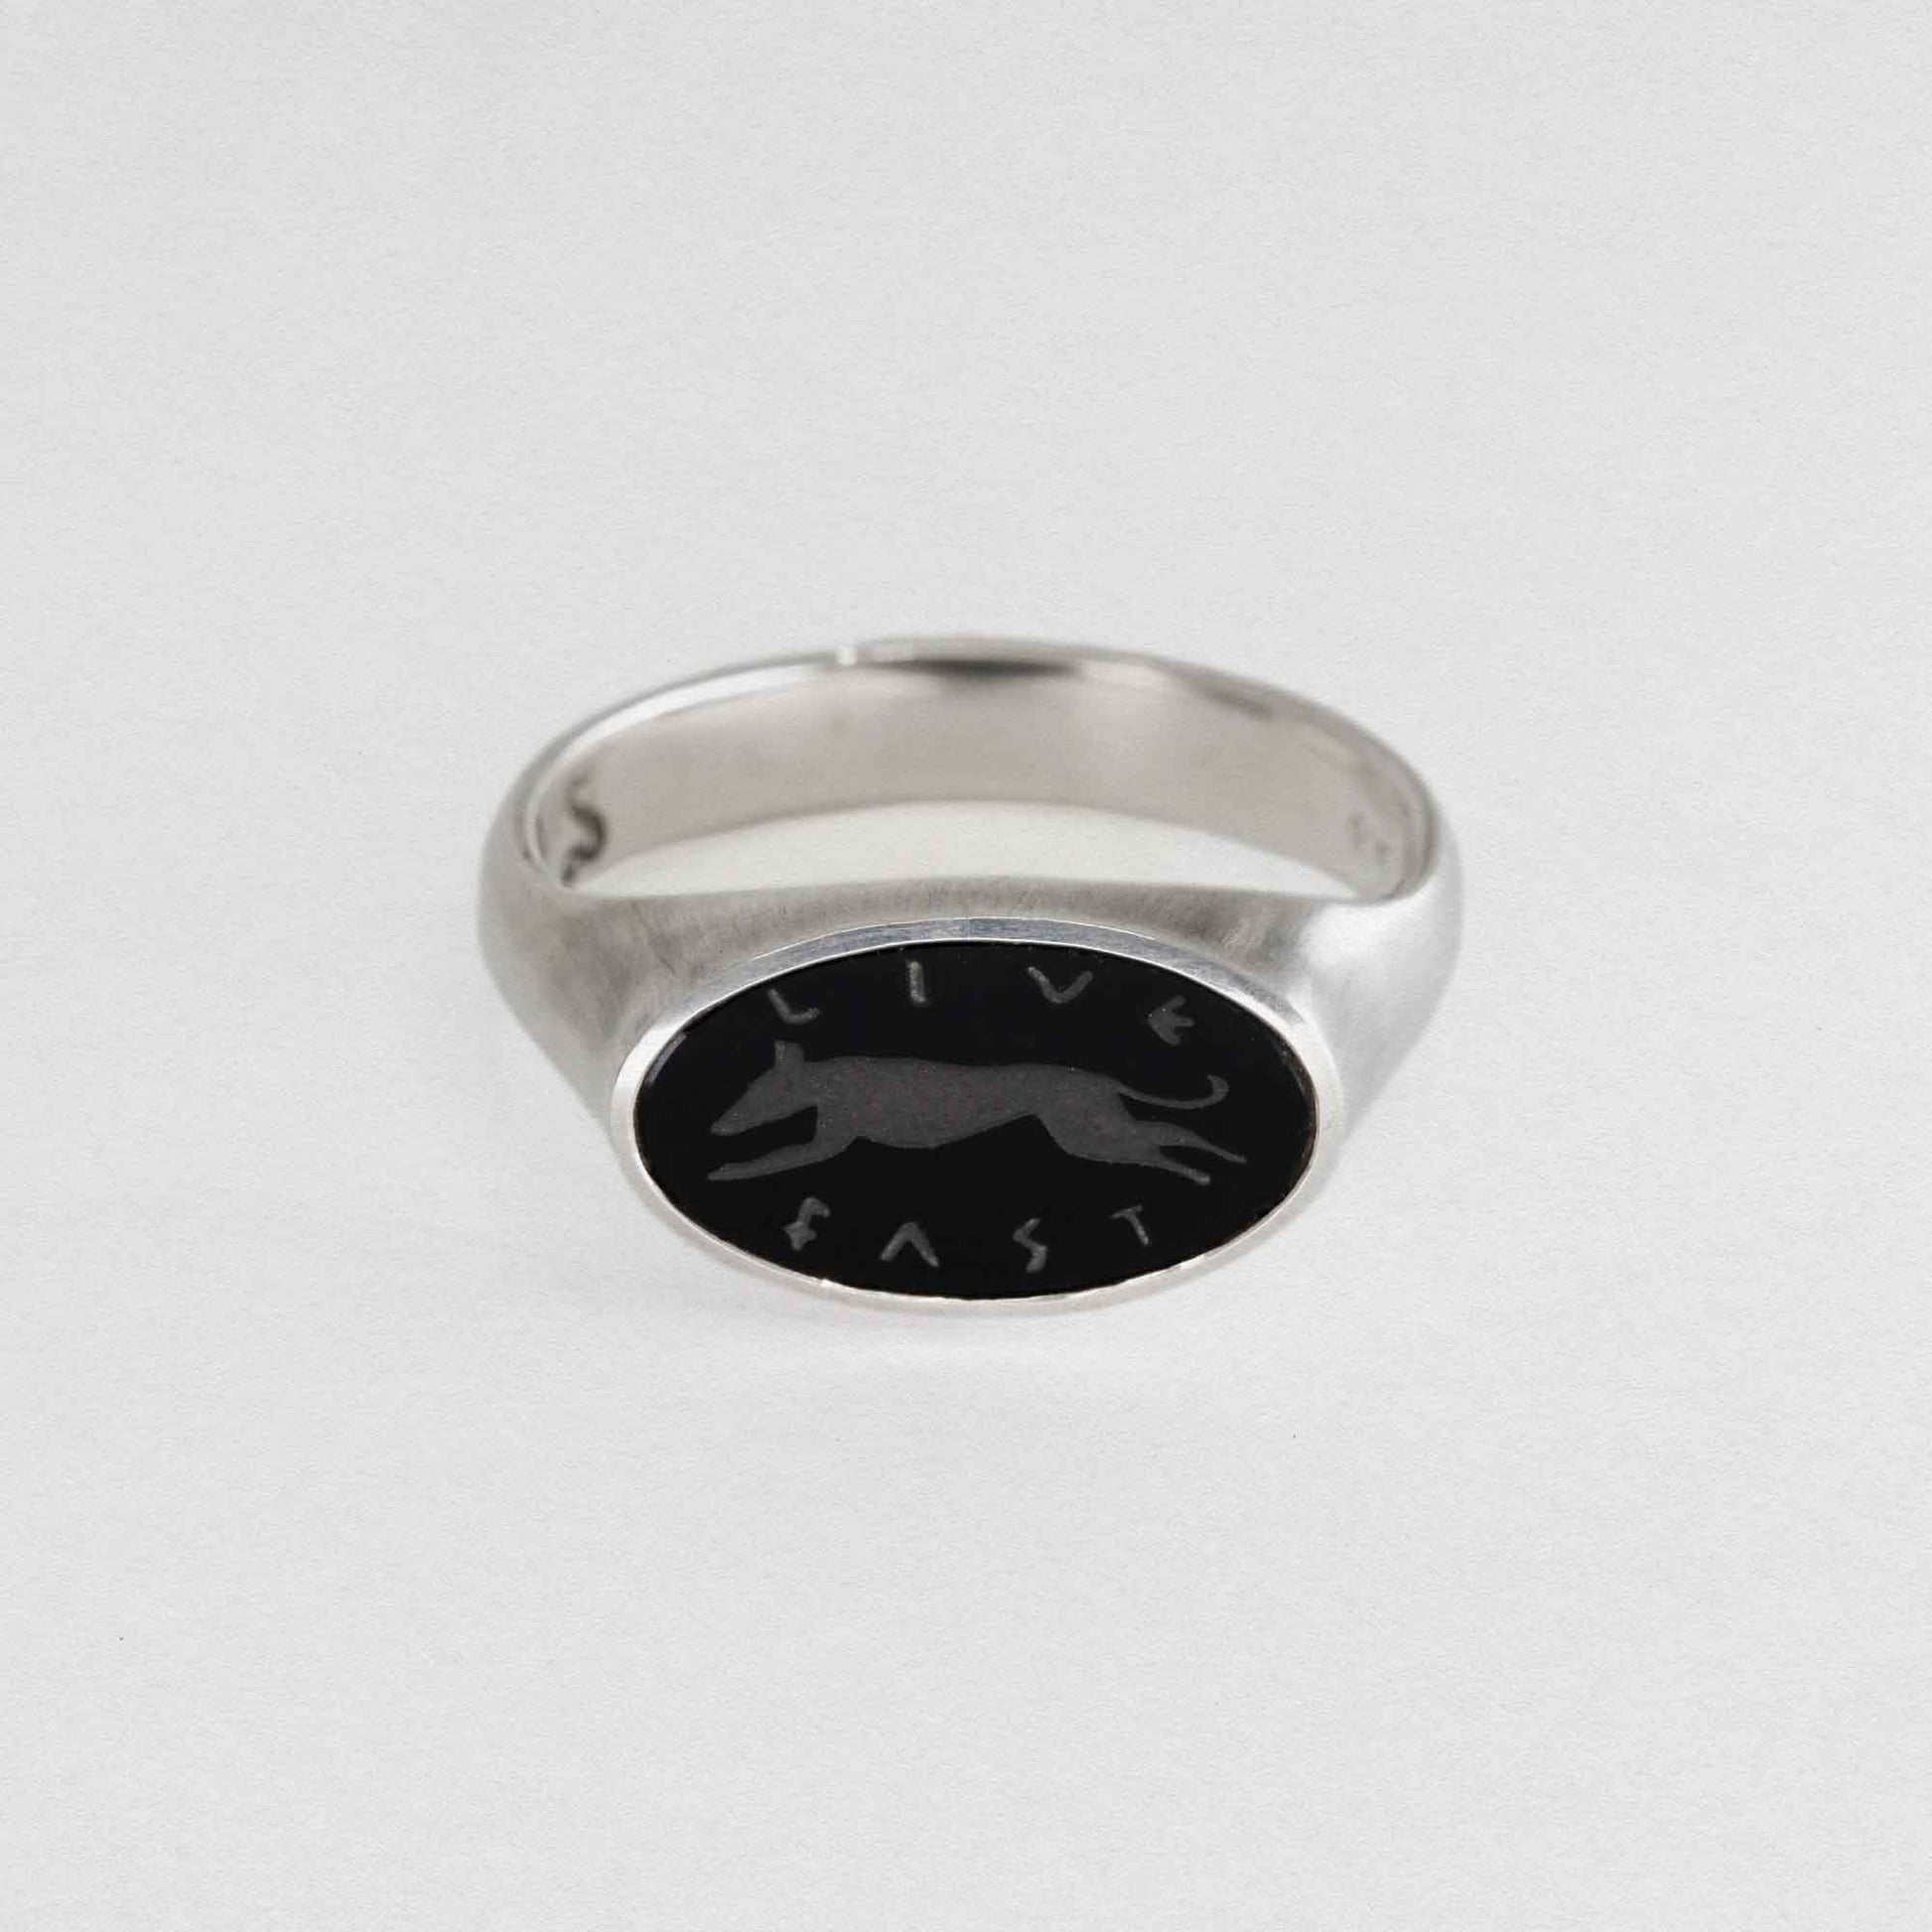 Silver Signet Ring With Greyhound Engraving On A Black Onyx Stone